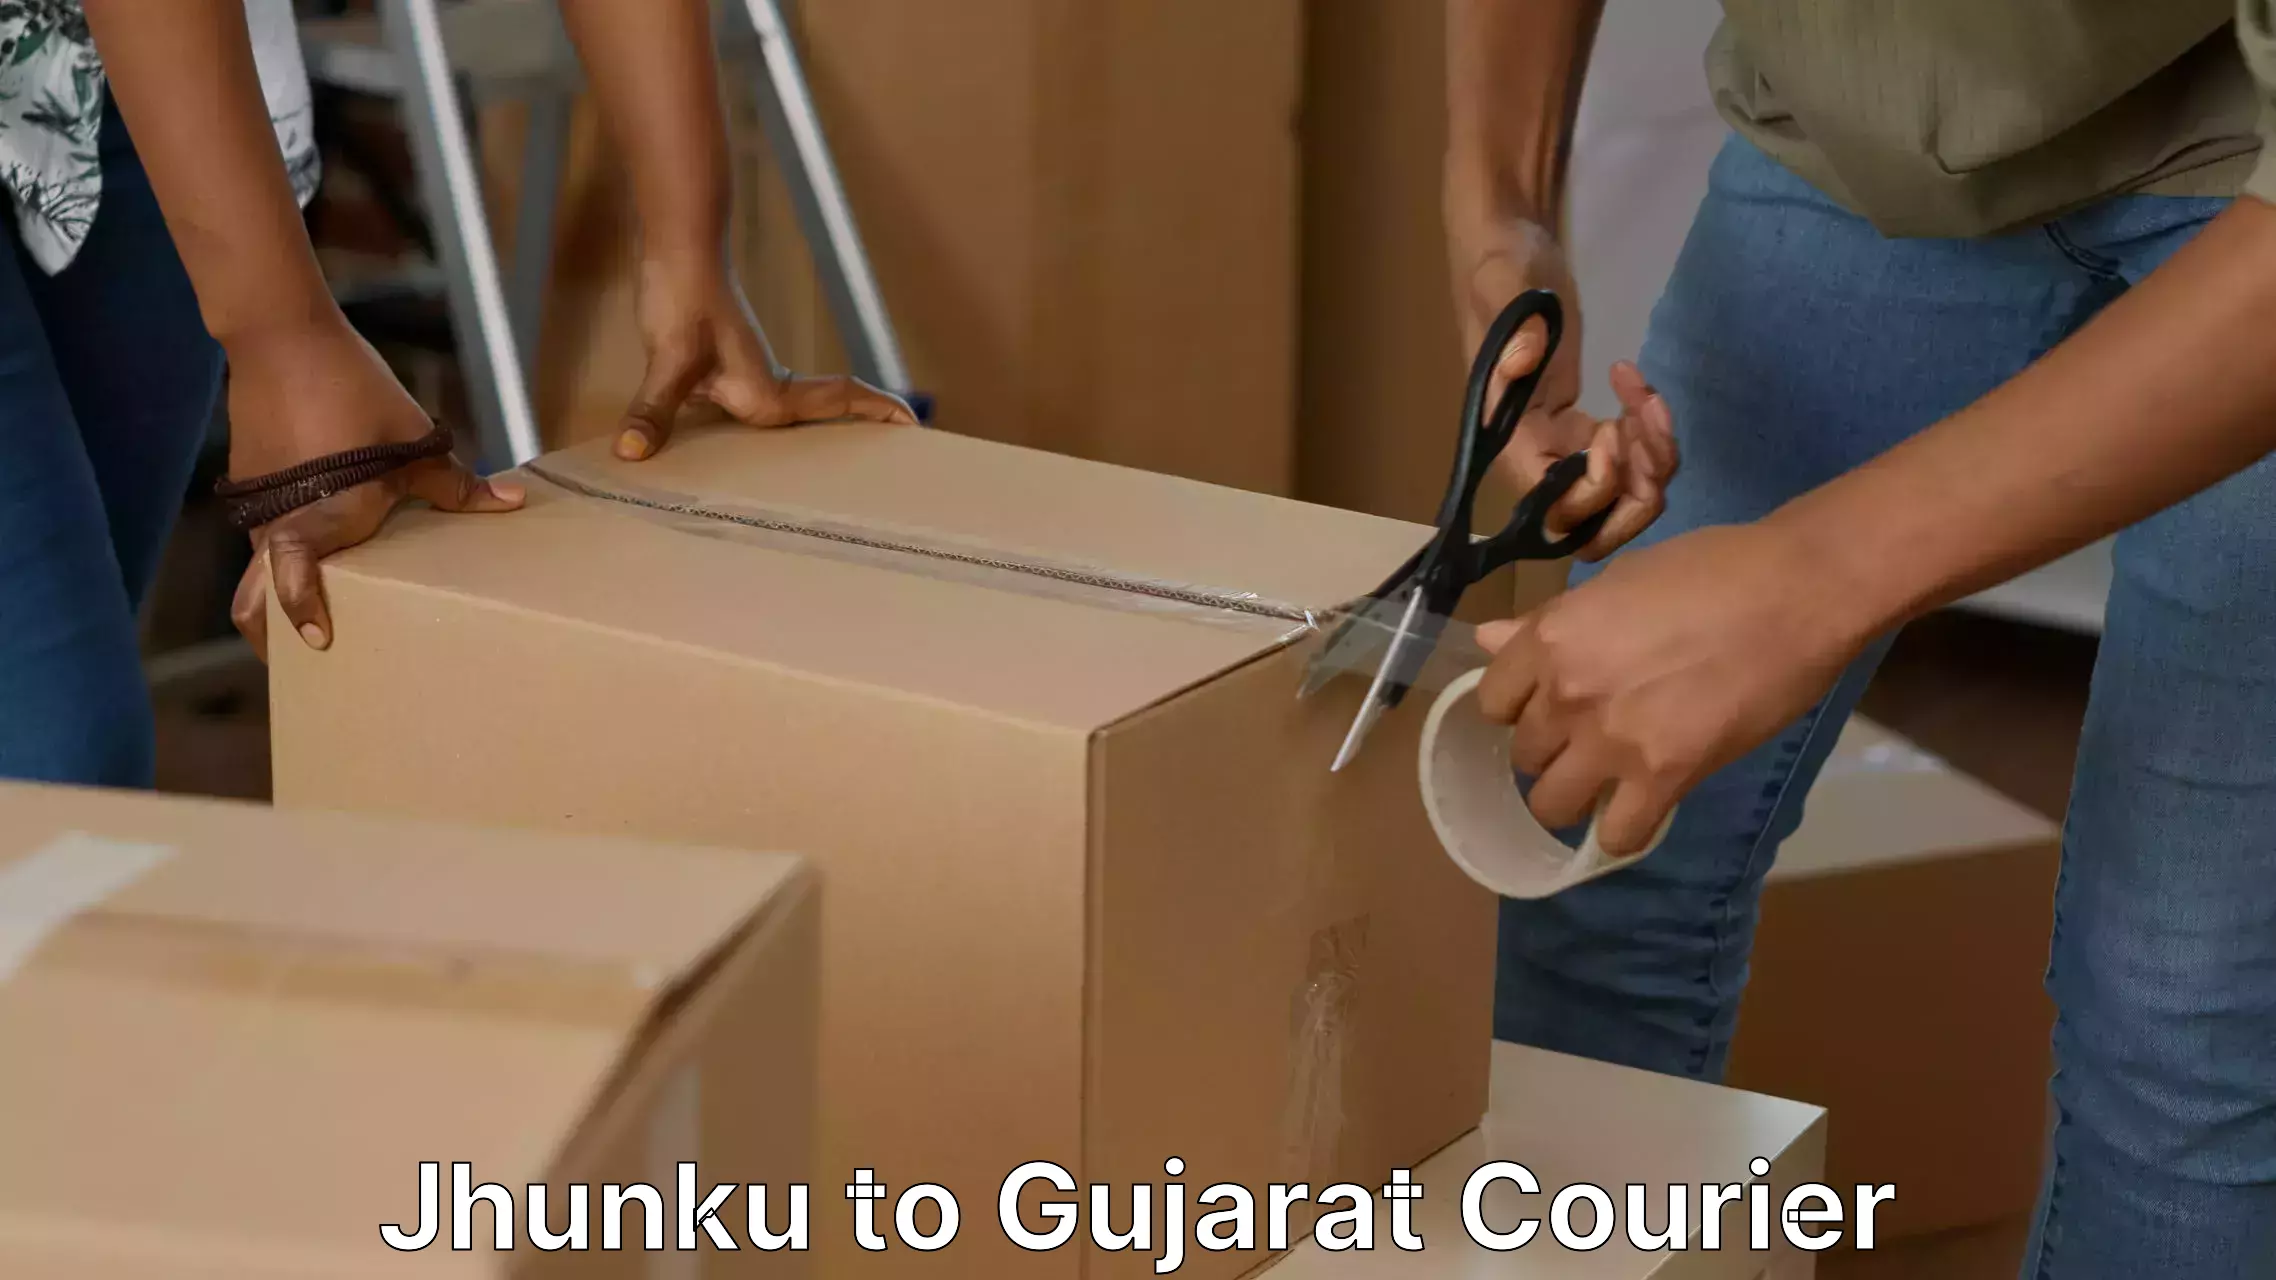 Reliable furniture transport Jhunku to Veraval